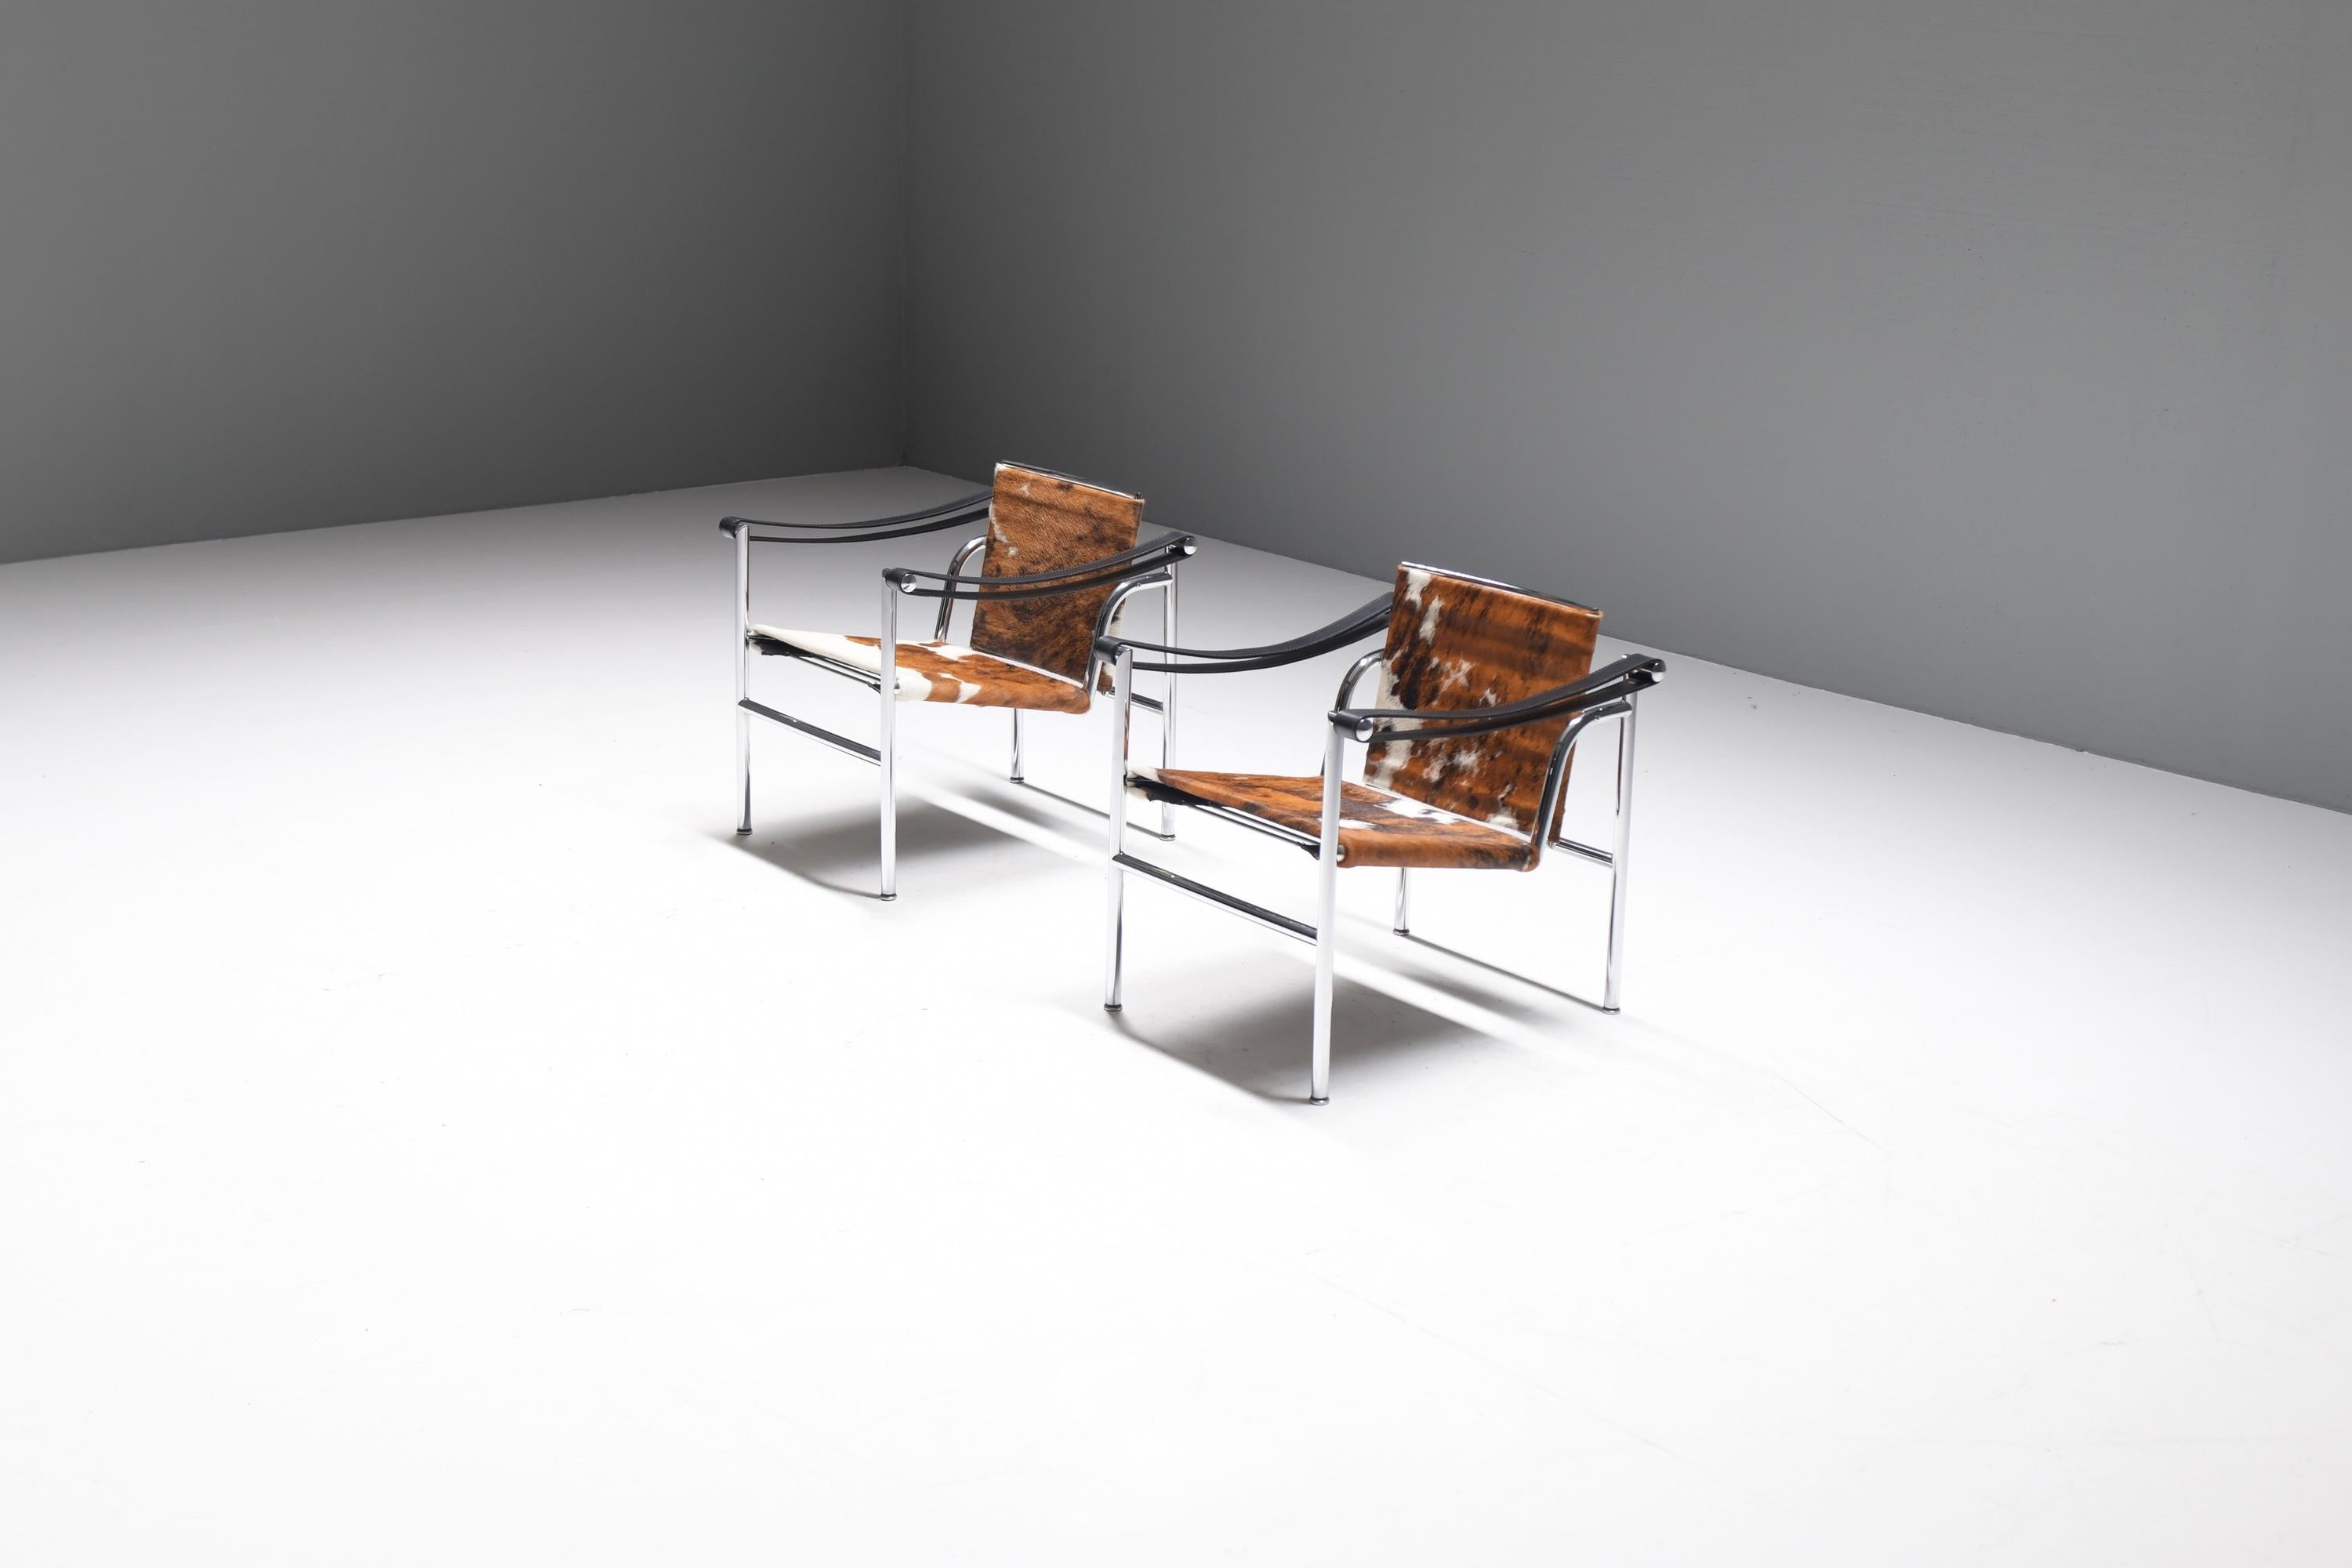 Exceptional matching LC-1 set in its original horse skin. First owner (2008) with original invoice & documentation.
Numbers 57829 and 57844
Designed by Le Corbusier, Pierre Jeanneret & Charlotte Perriand for Cassina.

A light, compact chair designed